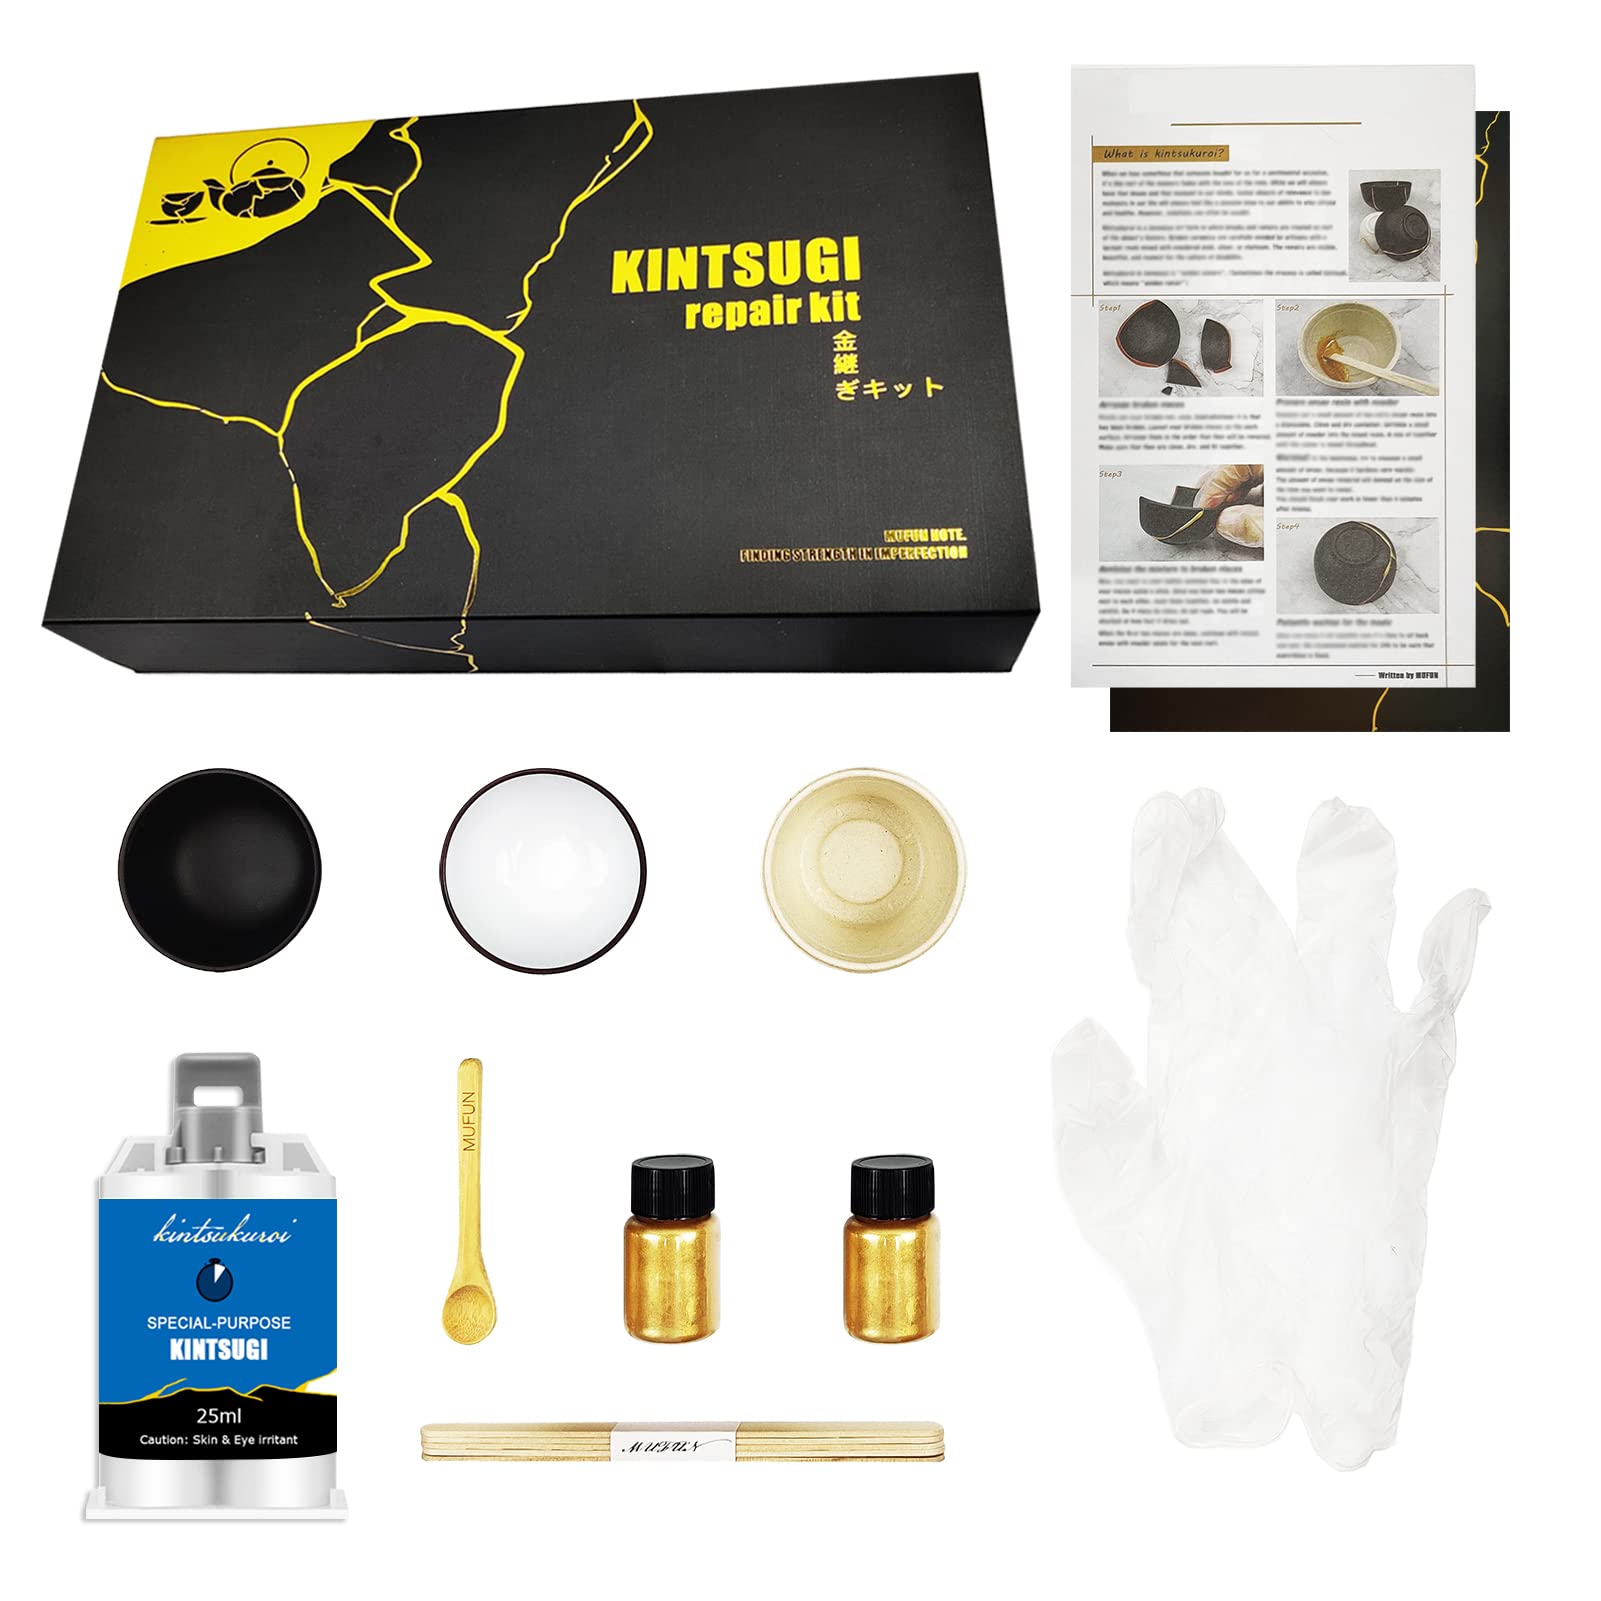 MUFUN Kintsugi Repair Kit Repair Your Meaningful Pottery with Gold Powder  Glue - Comes with Two Practice Ceramic Cups for Starter